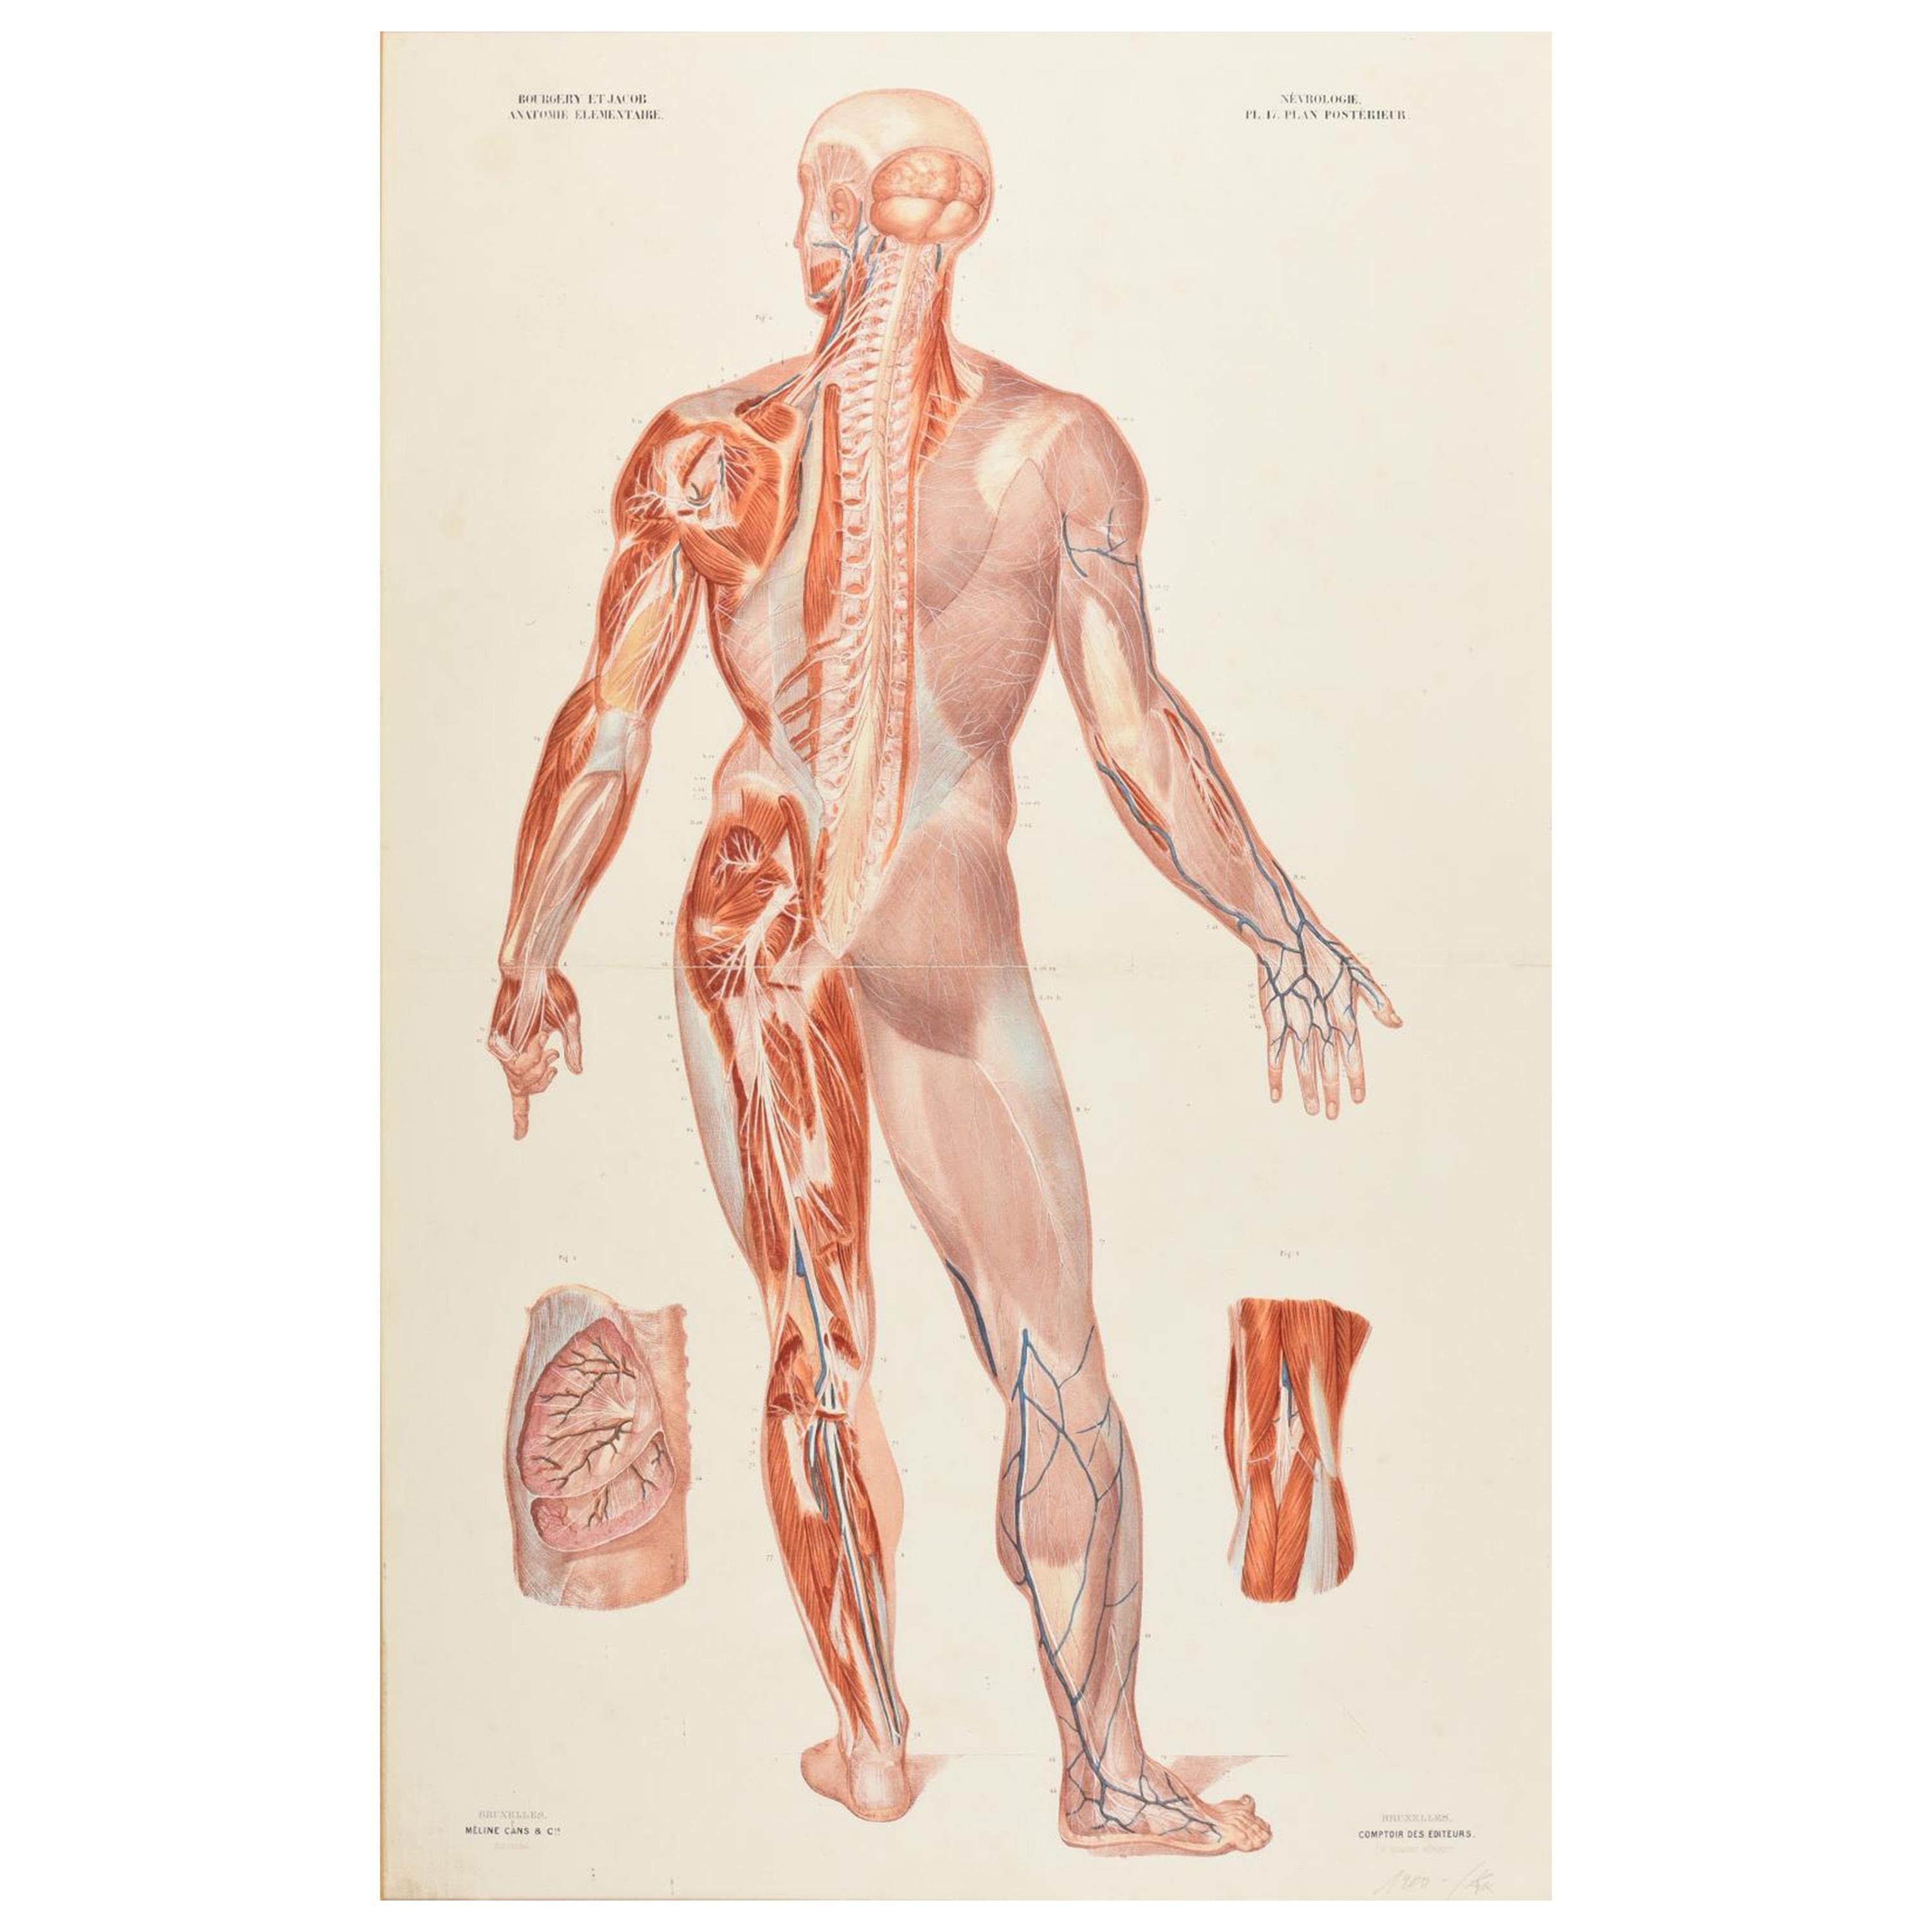 Antique Anatomical Print of the Nervous System in the Human Body '1843'